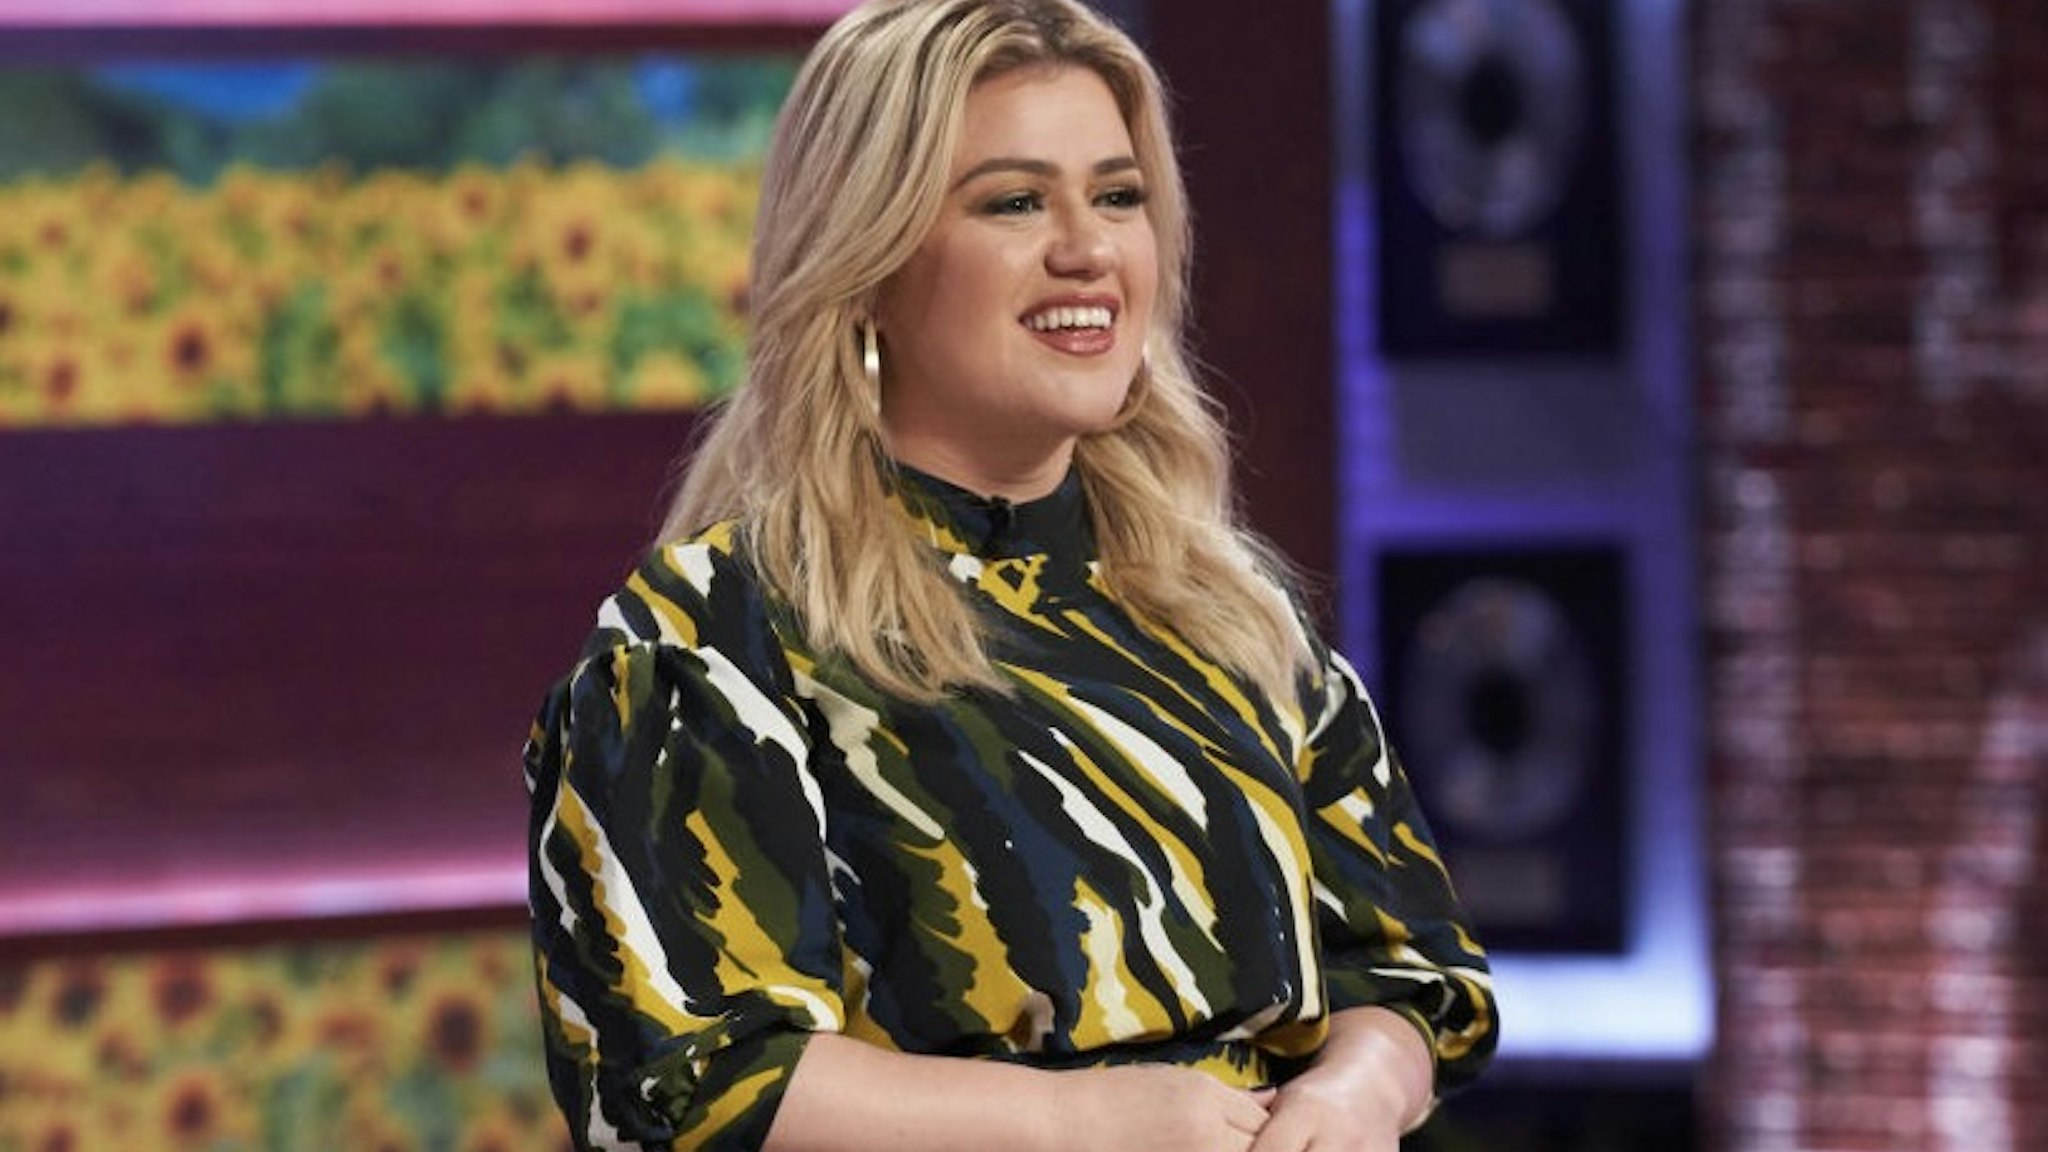 The Kelly Clarkson Show - Season 1 THE KELLY CLARKSON SHOW -- Episode 3078 -- Pictured: Kelly Clarkson -- (Photo by: Adam Christopher/NBCUniversal/NBCU Photo Bank via Getty Images) NBC / Contributor via Getty Images